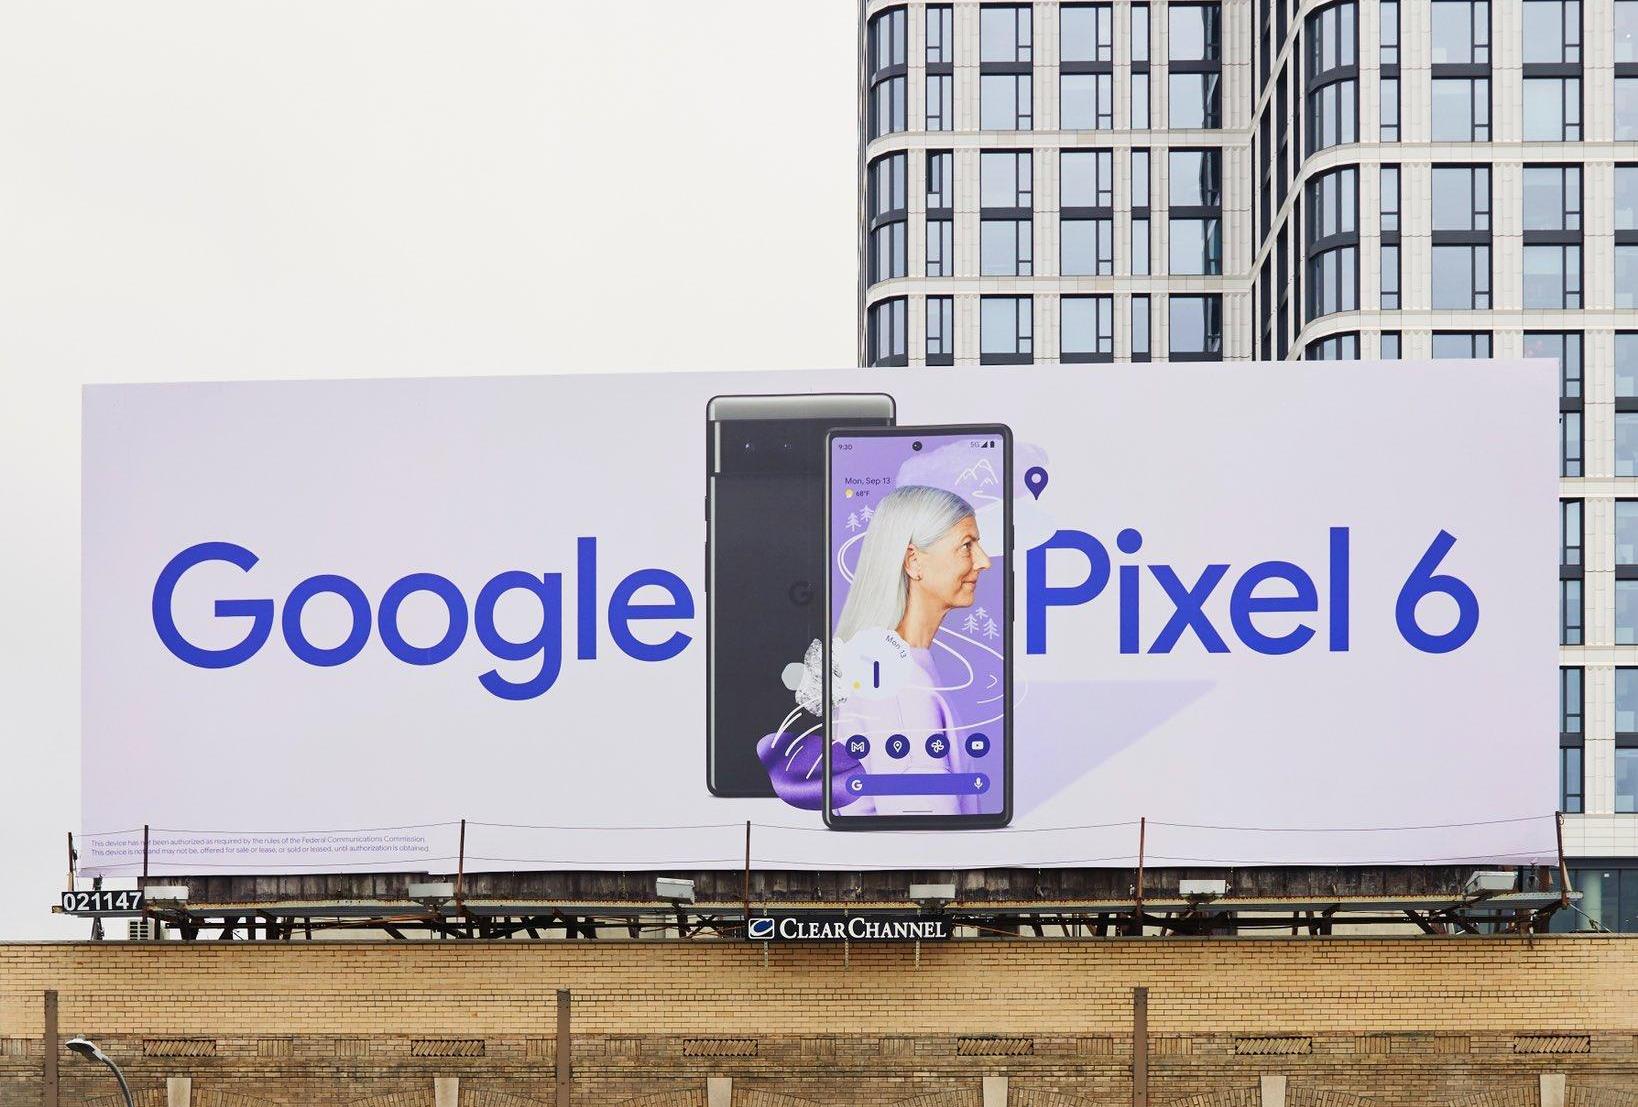 Google is already advertising the Pixel 6 and Pixel 6 Pro on the streets of the US. The official announcement is just around the corner